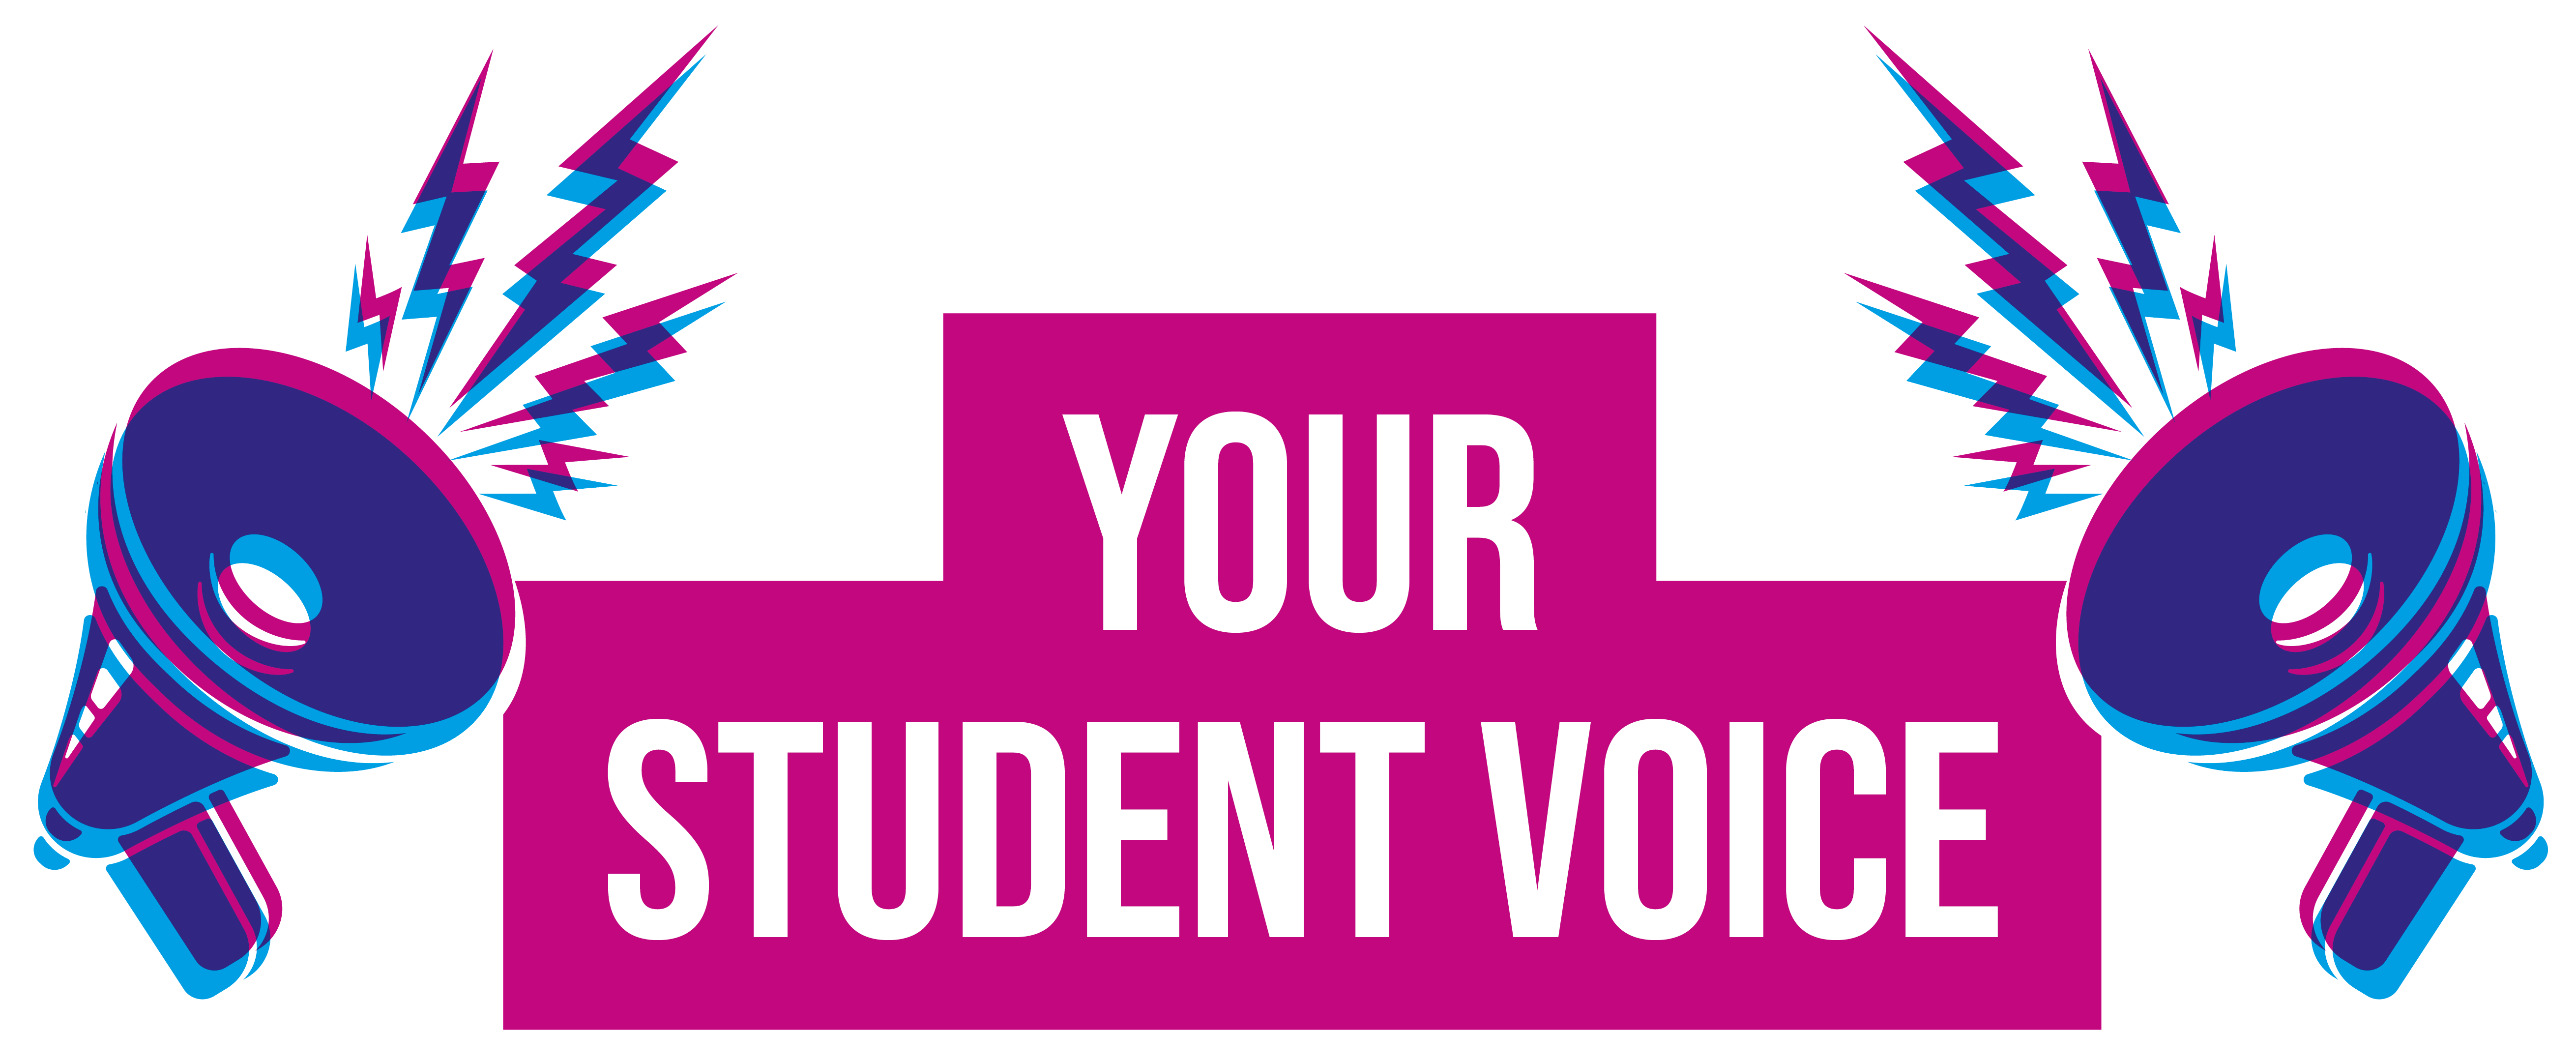 Your Student Voice